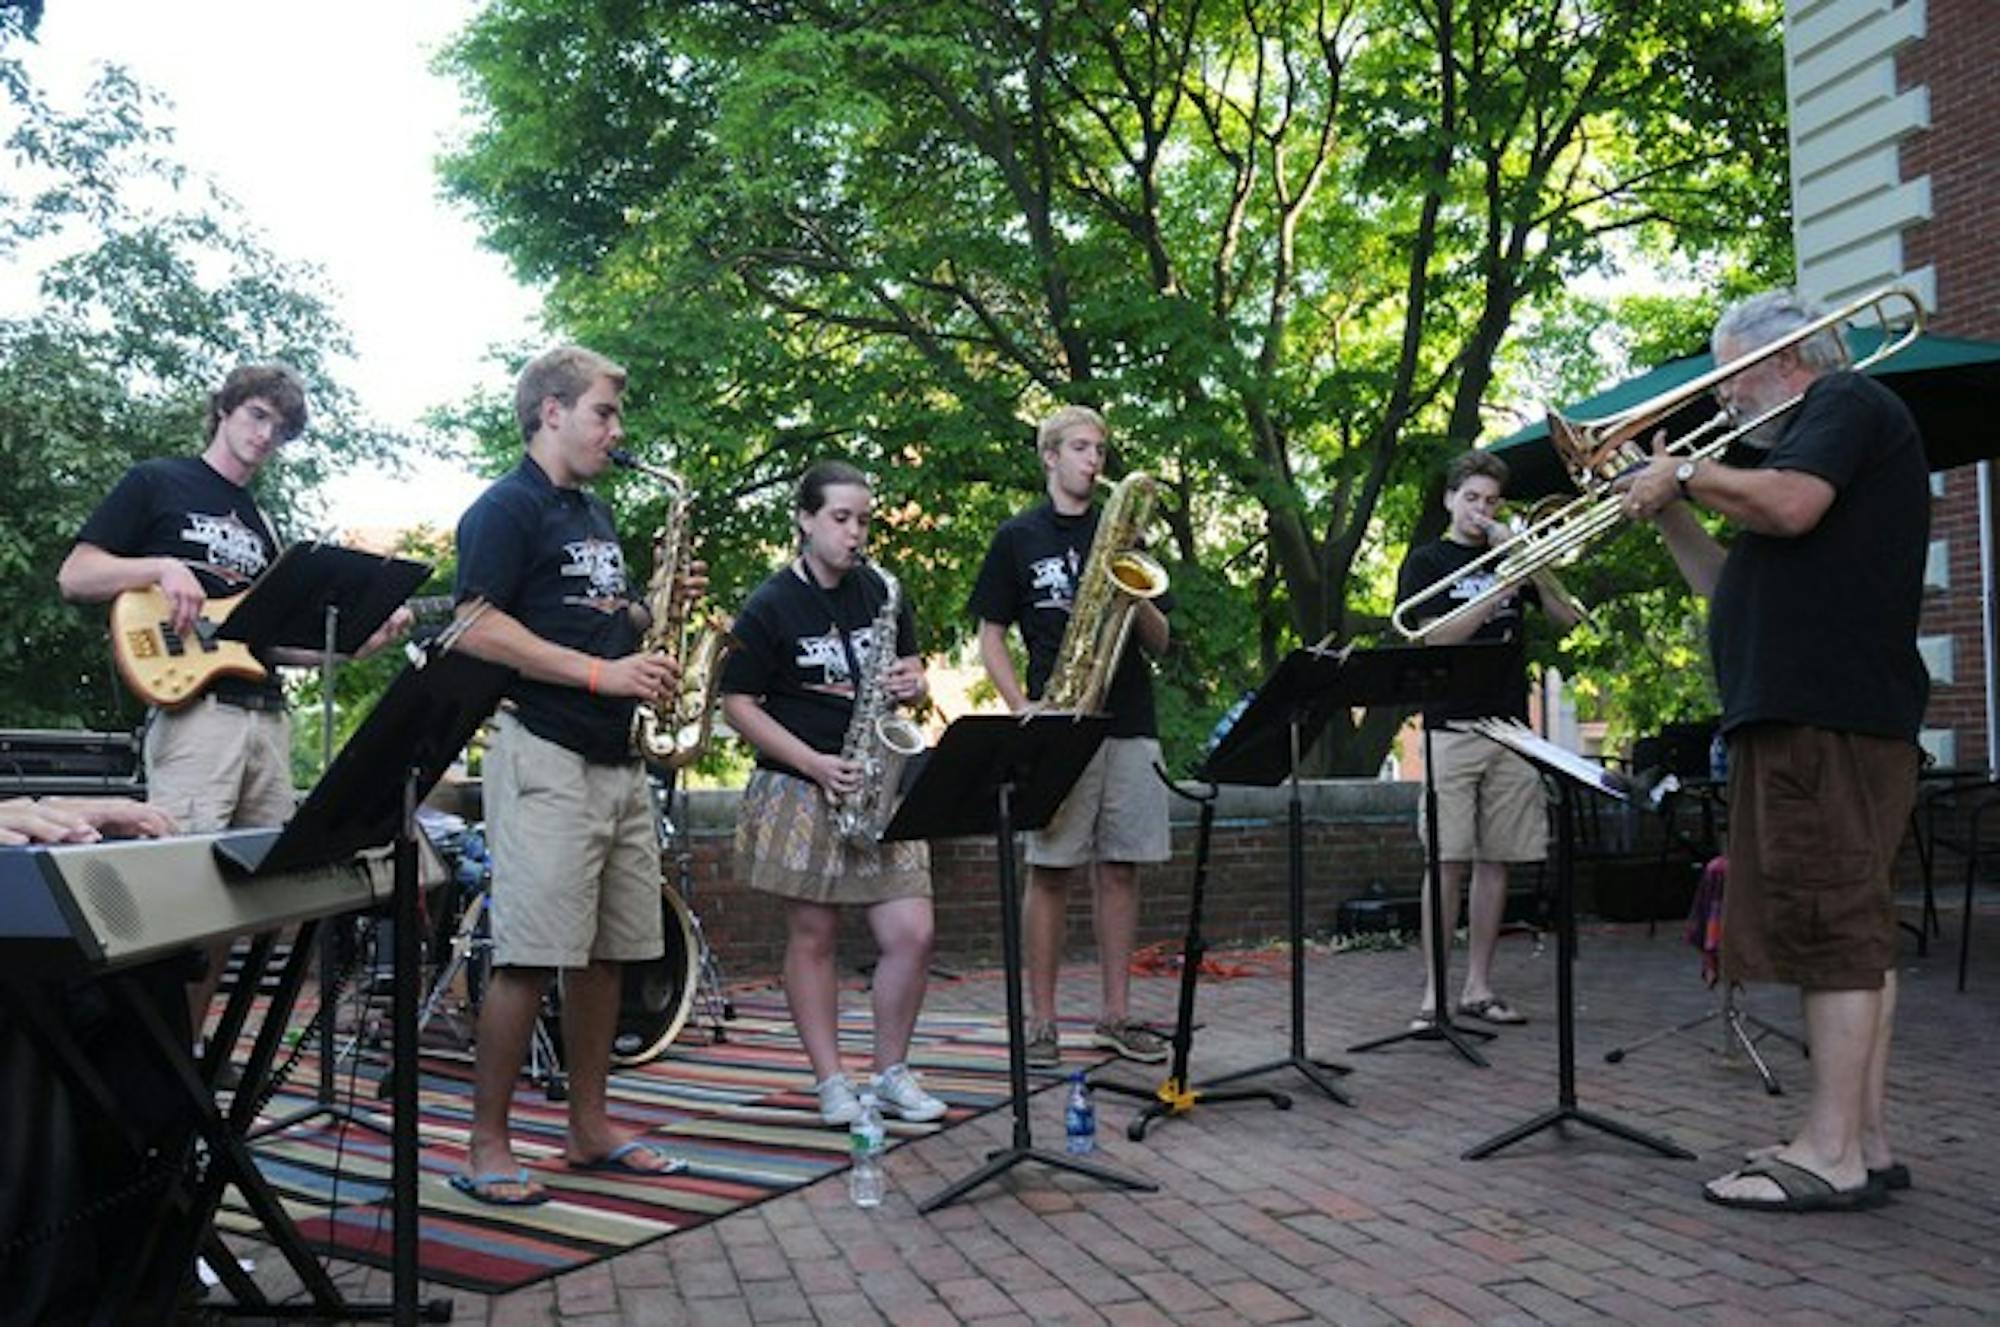 Members of the Barbary Coast, led by Donald Glasgo, perform on Collis Porch this summer.